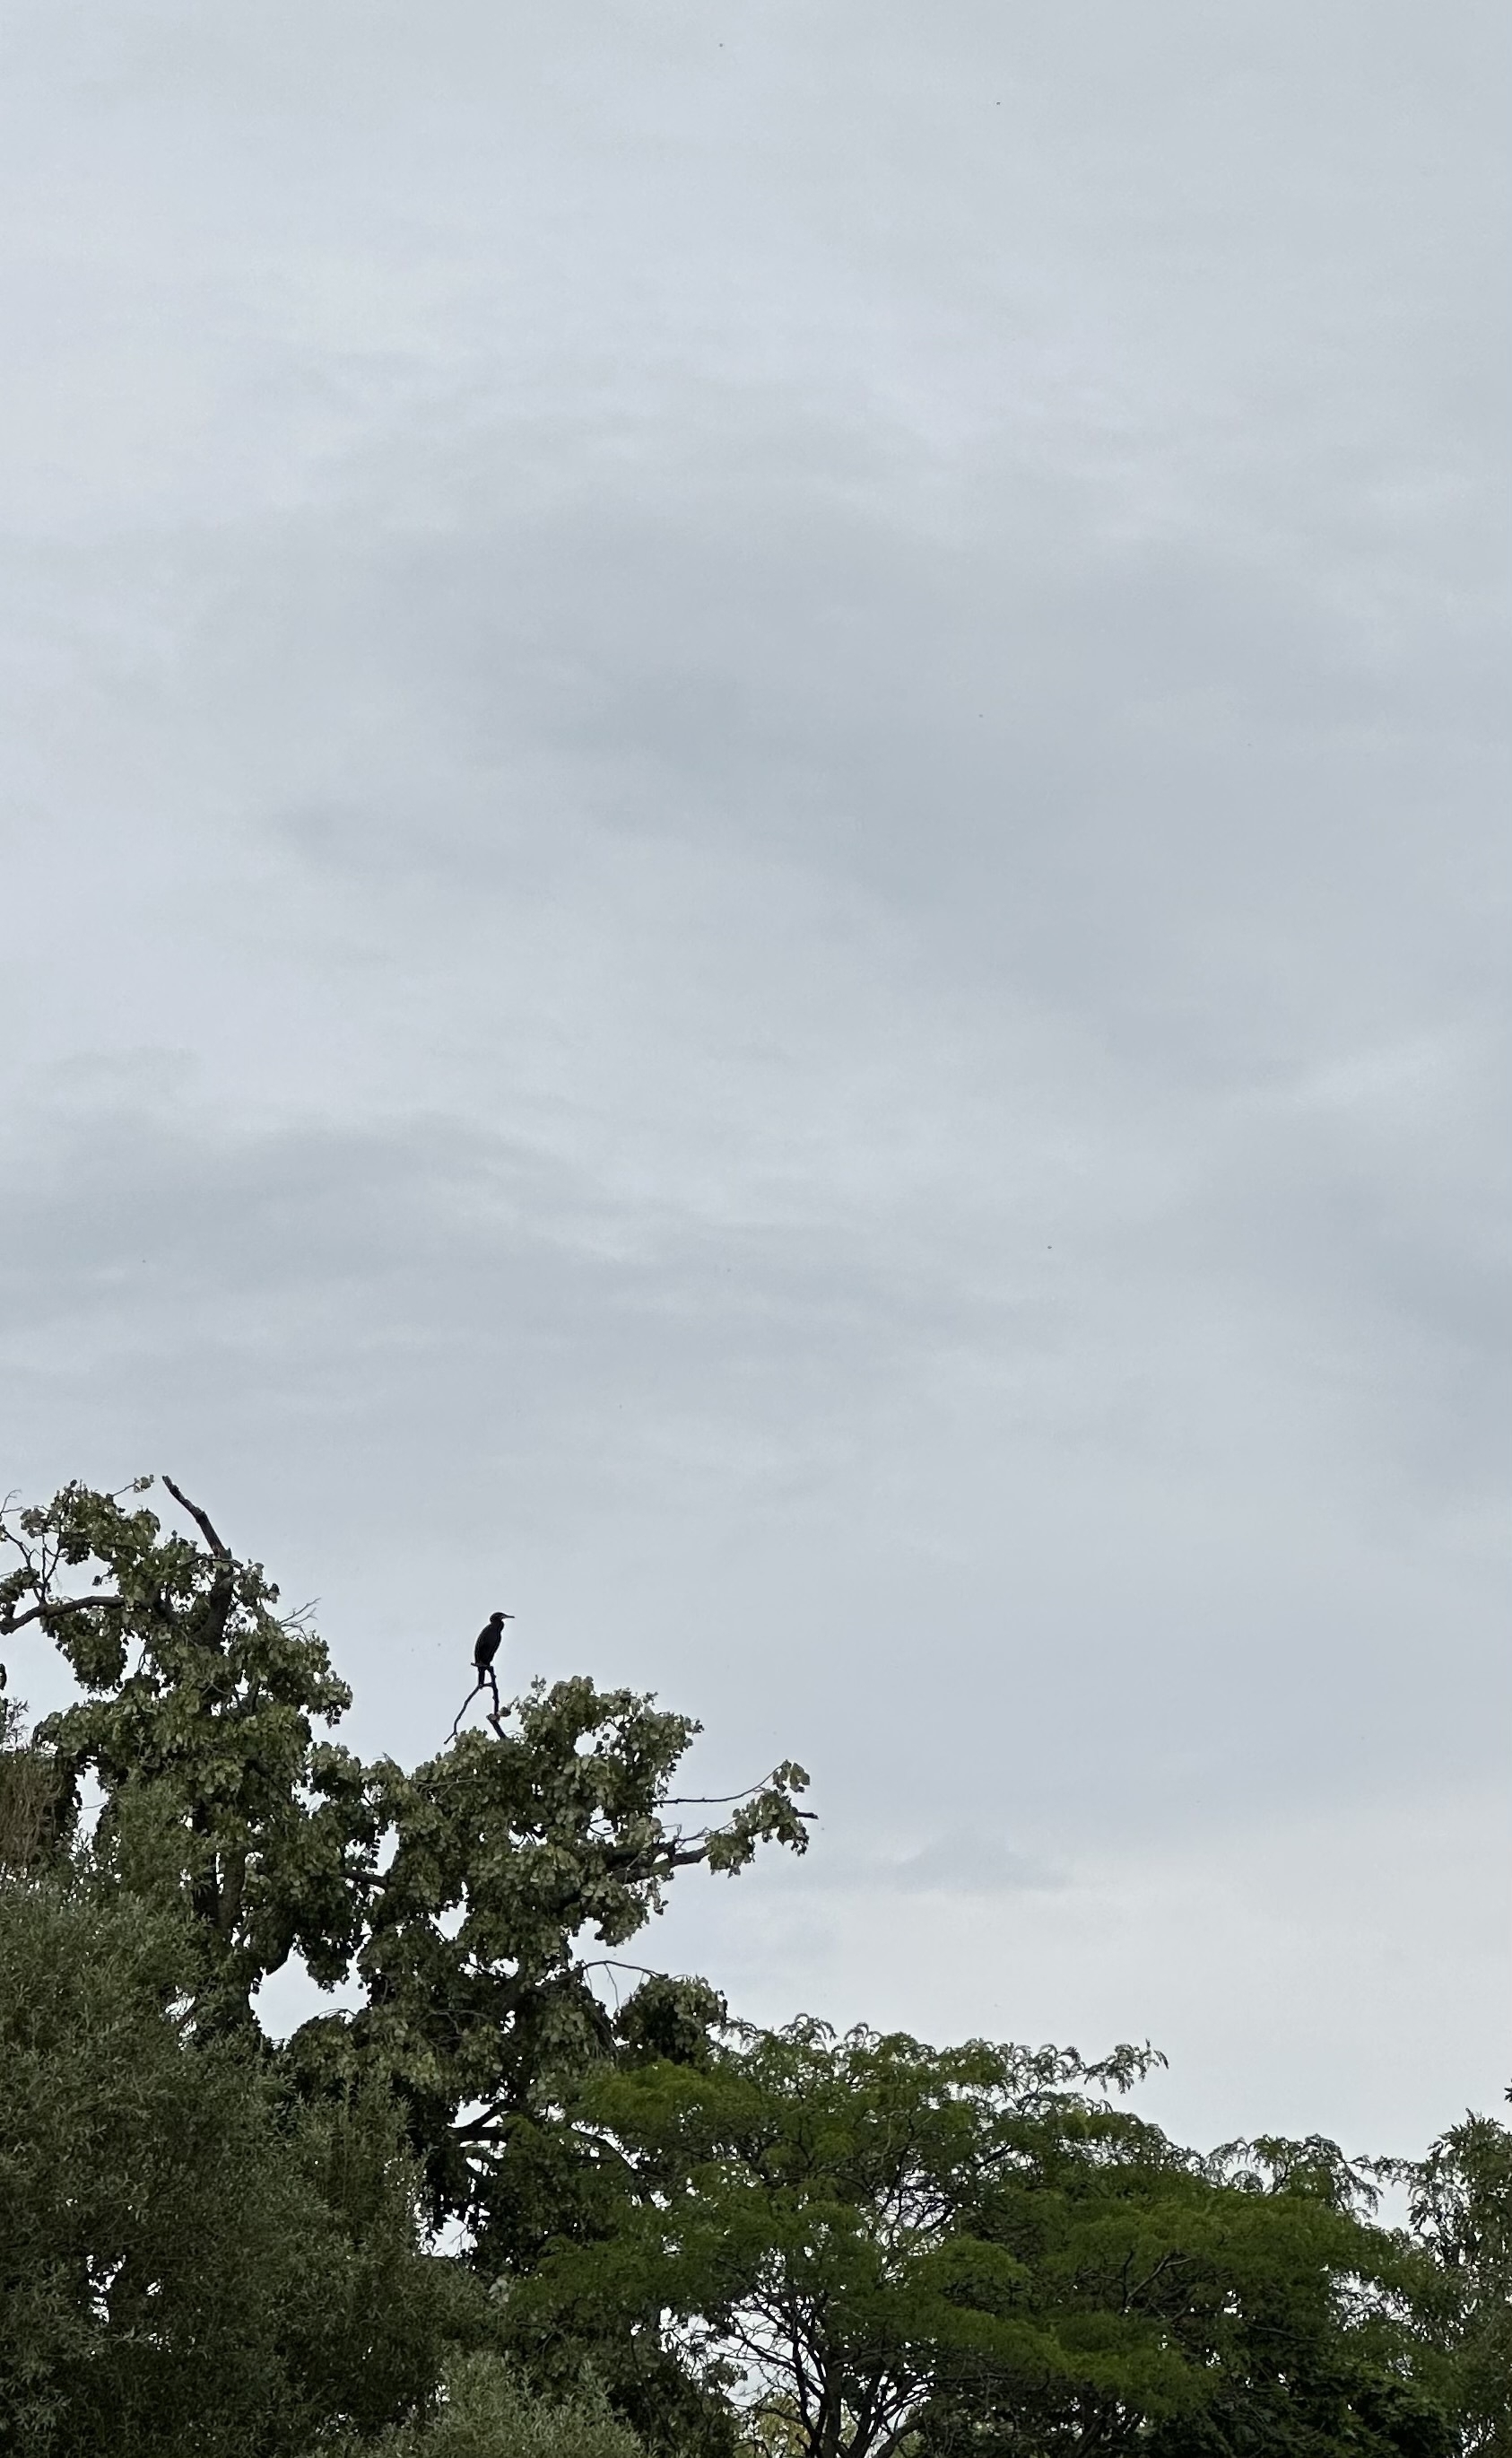 A heron perched on the top of some trees